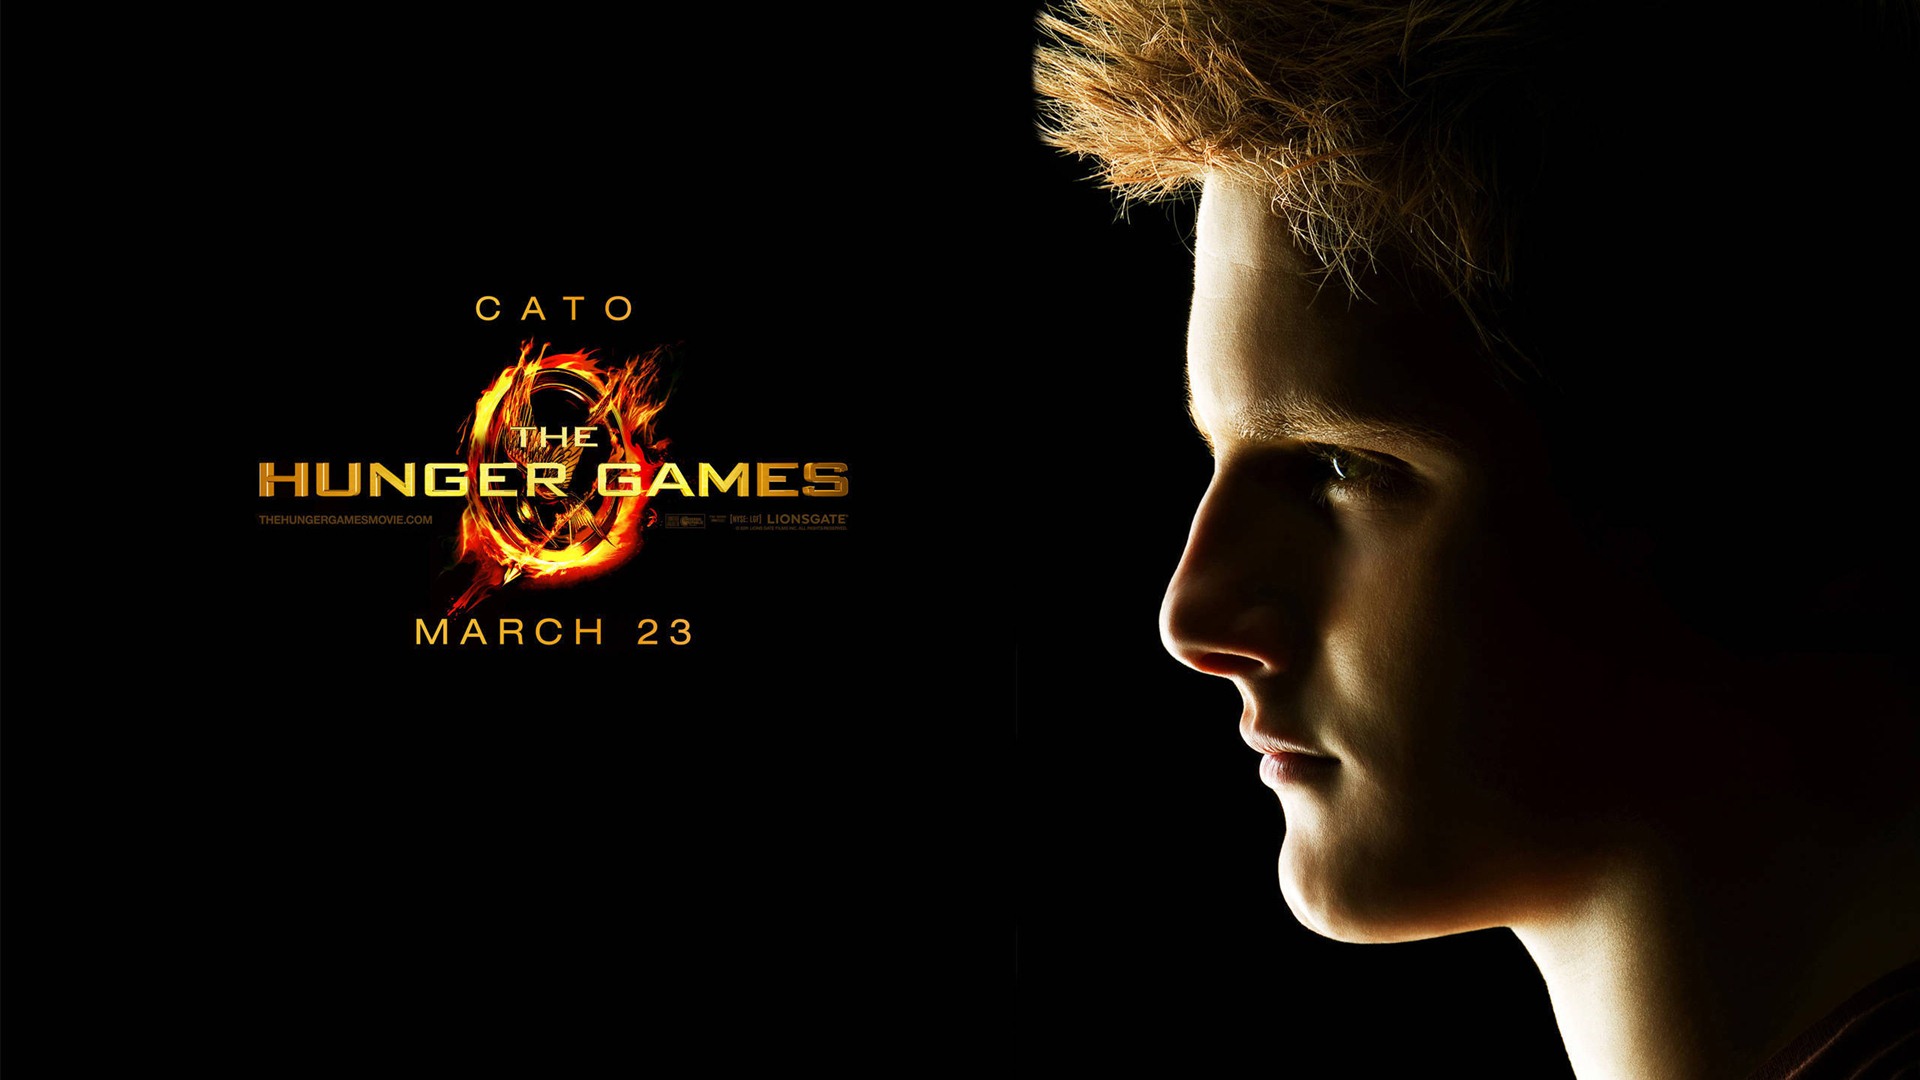 The Hunger Games HD wallpapers #3 - 1920x1080